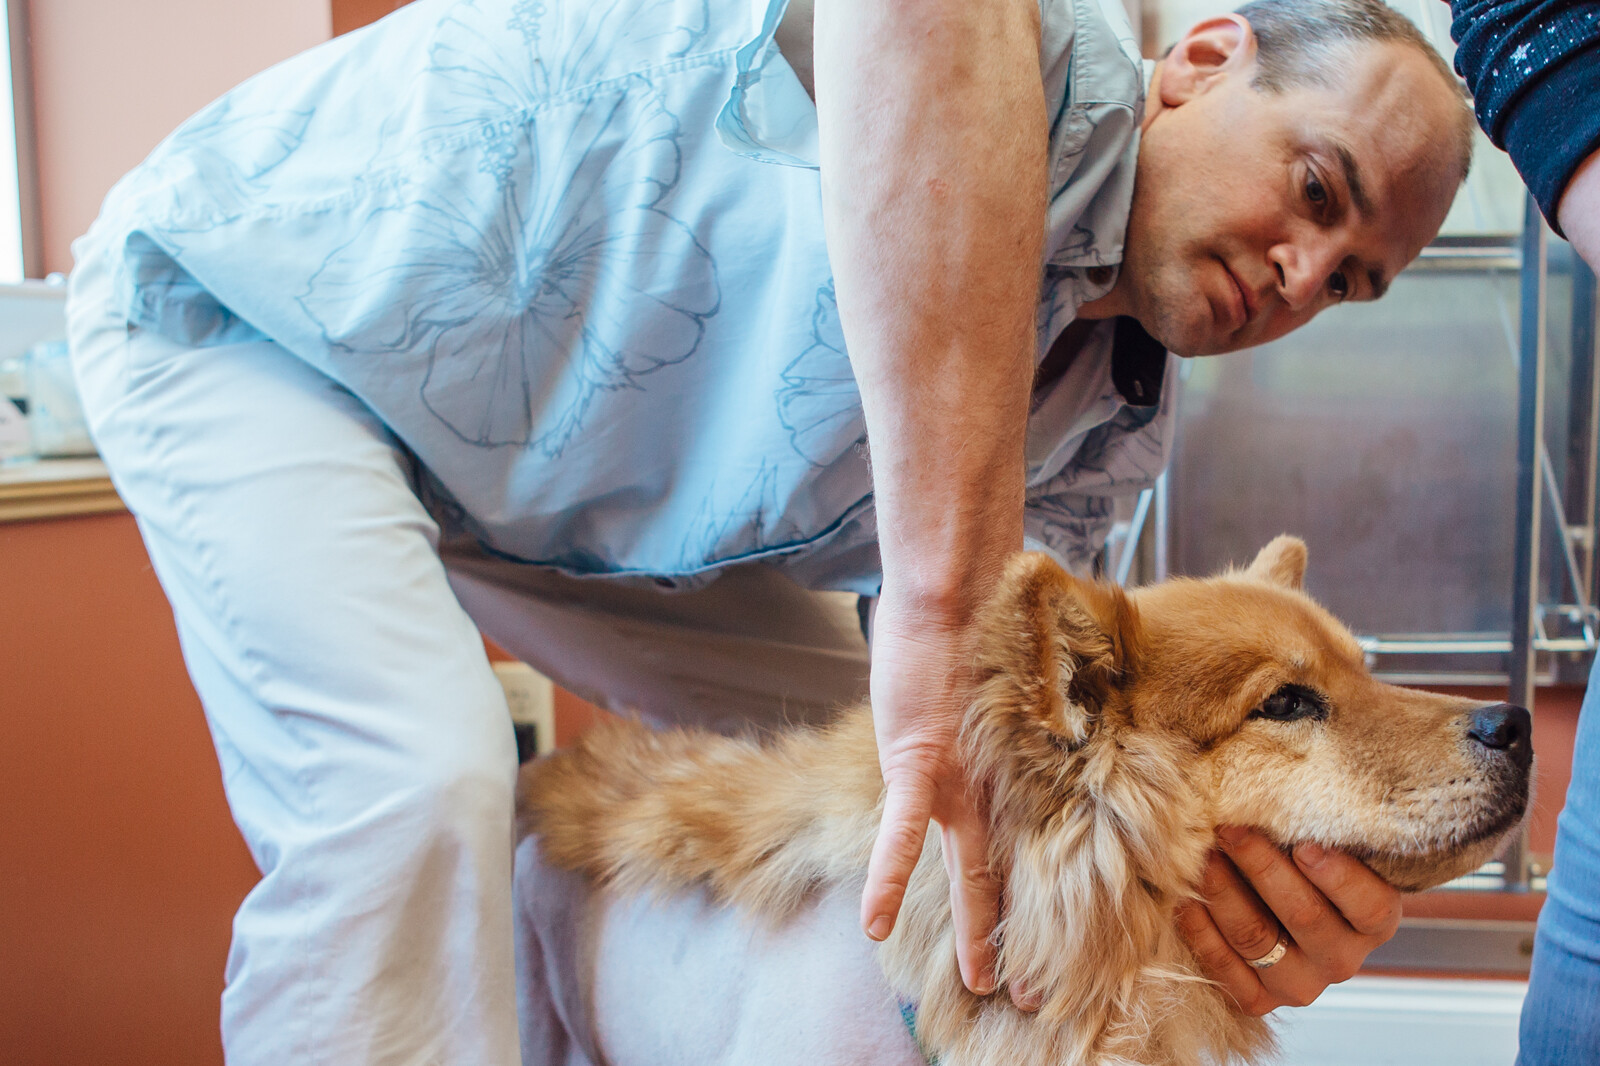 Dr Nate Performing a Chiropractic Adjustment on a Dog